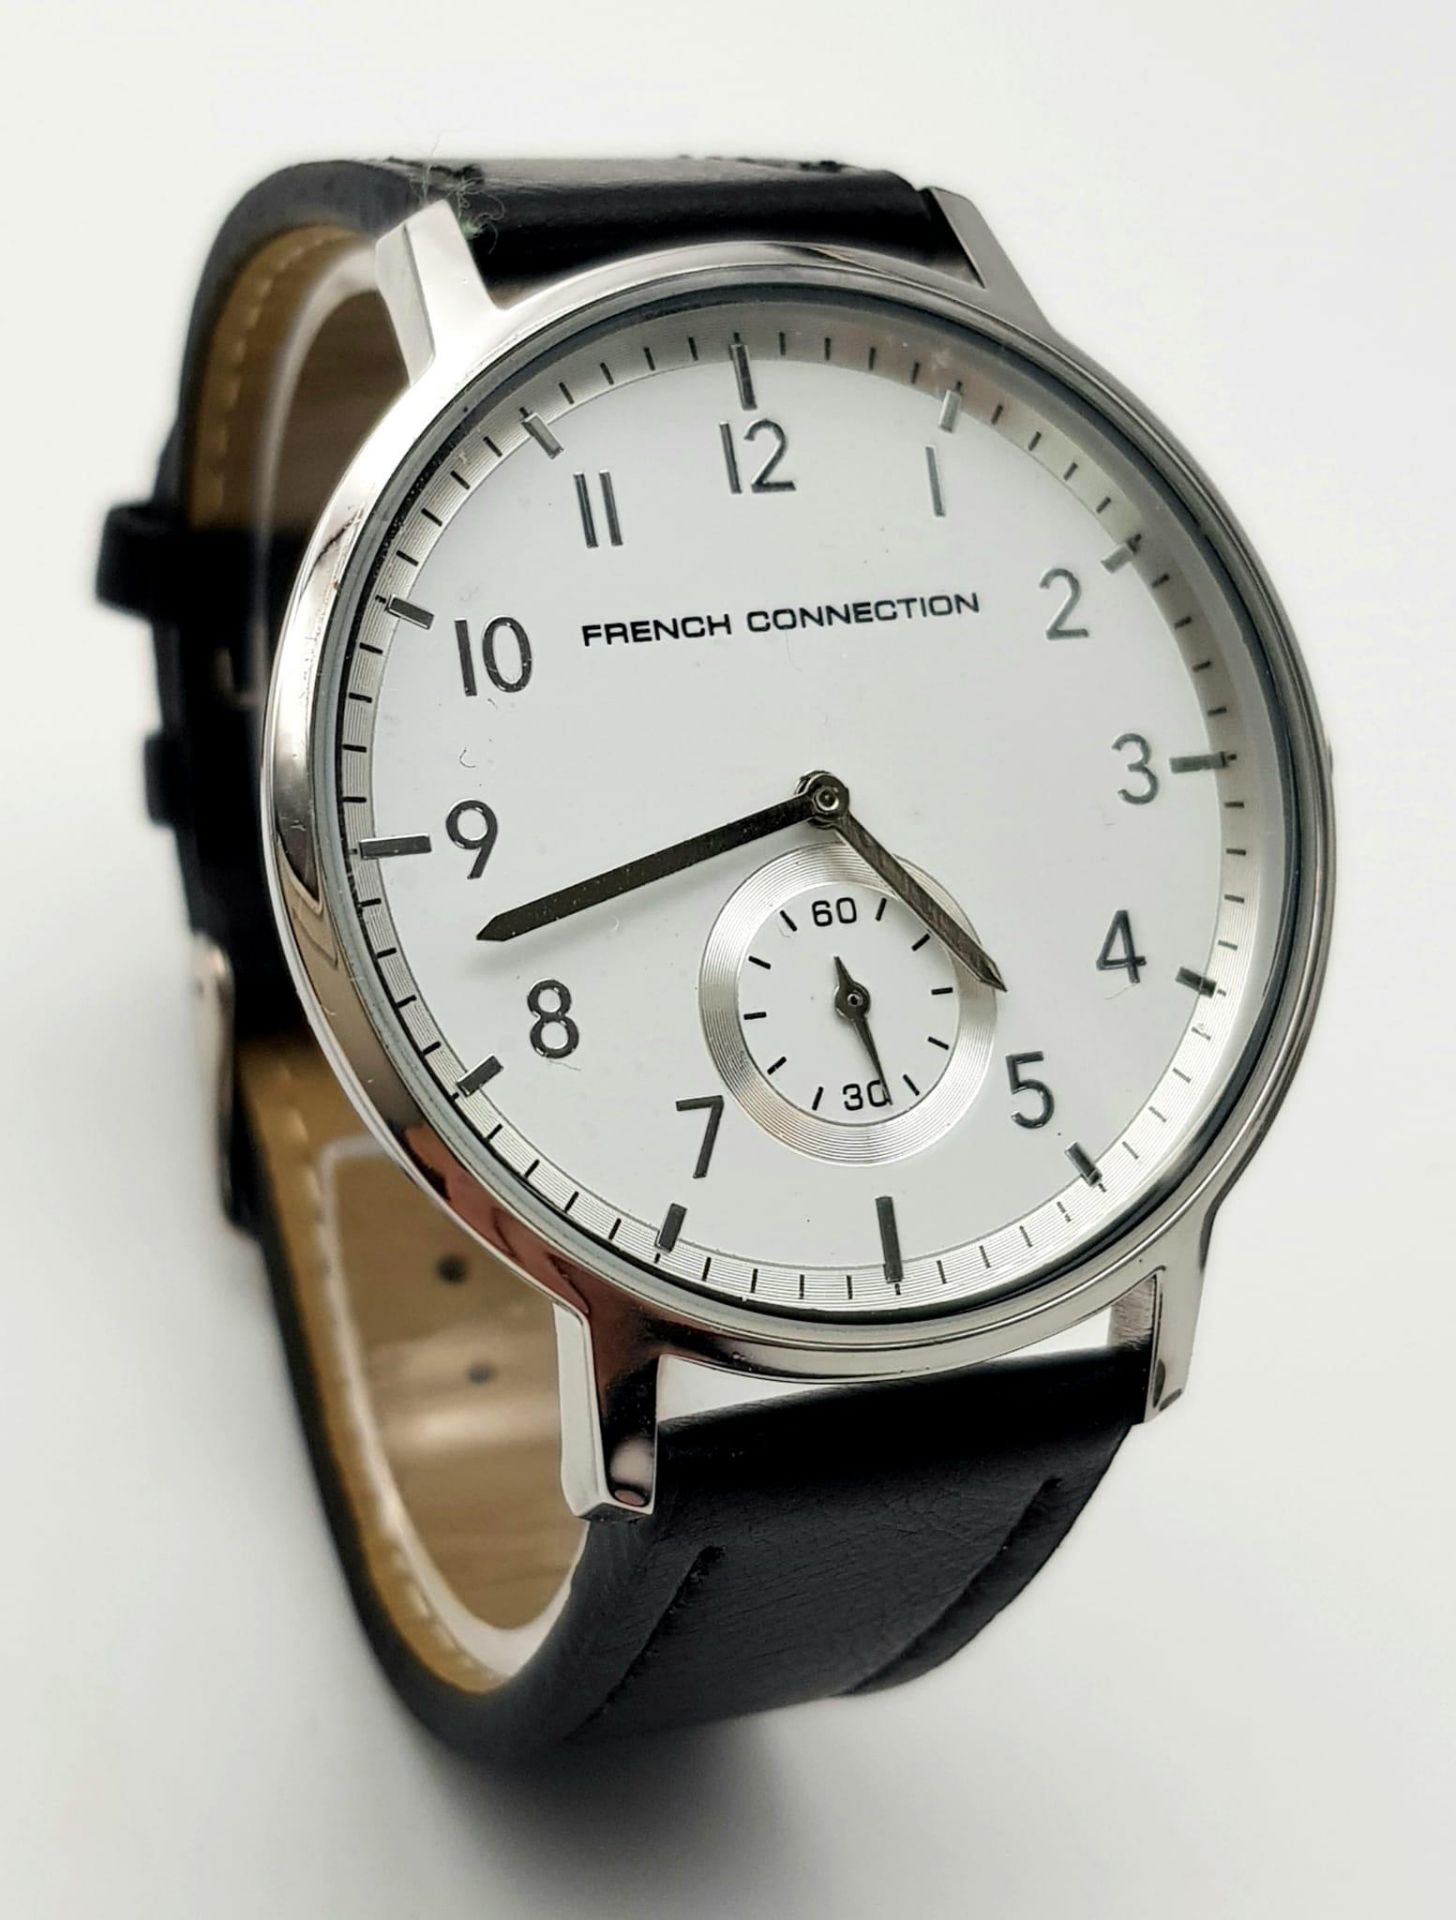 An Unused Subsidiary Dial Quartz Watch by French Connection. 44mm Including Dial. Full Working